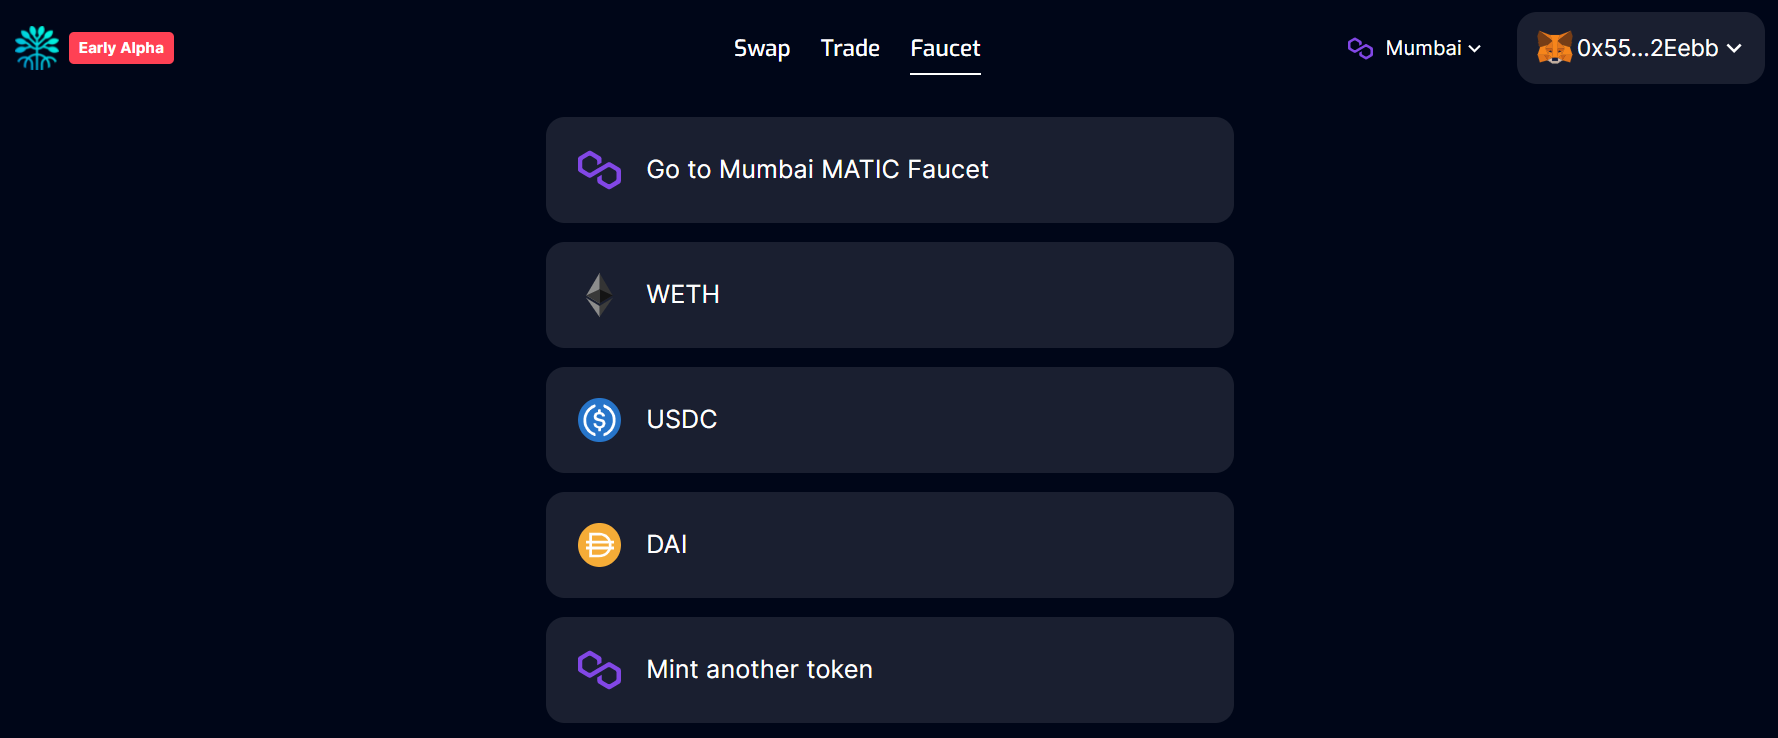 We go to the side and connect the wallet. In the "Faucet" tab, we get all the test tokens.